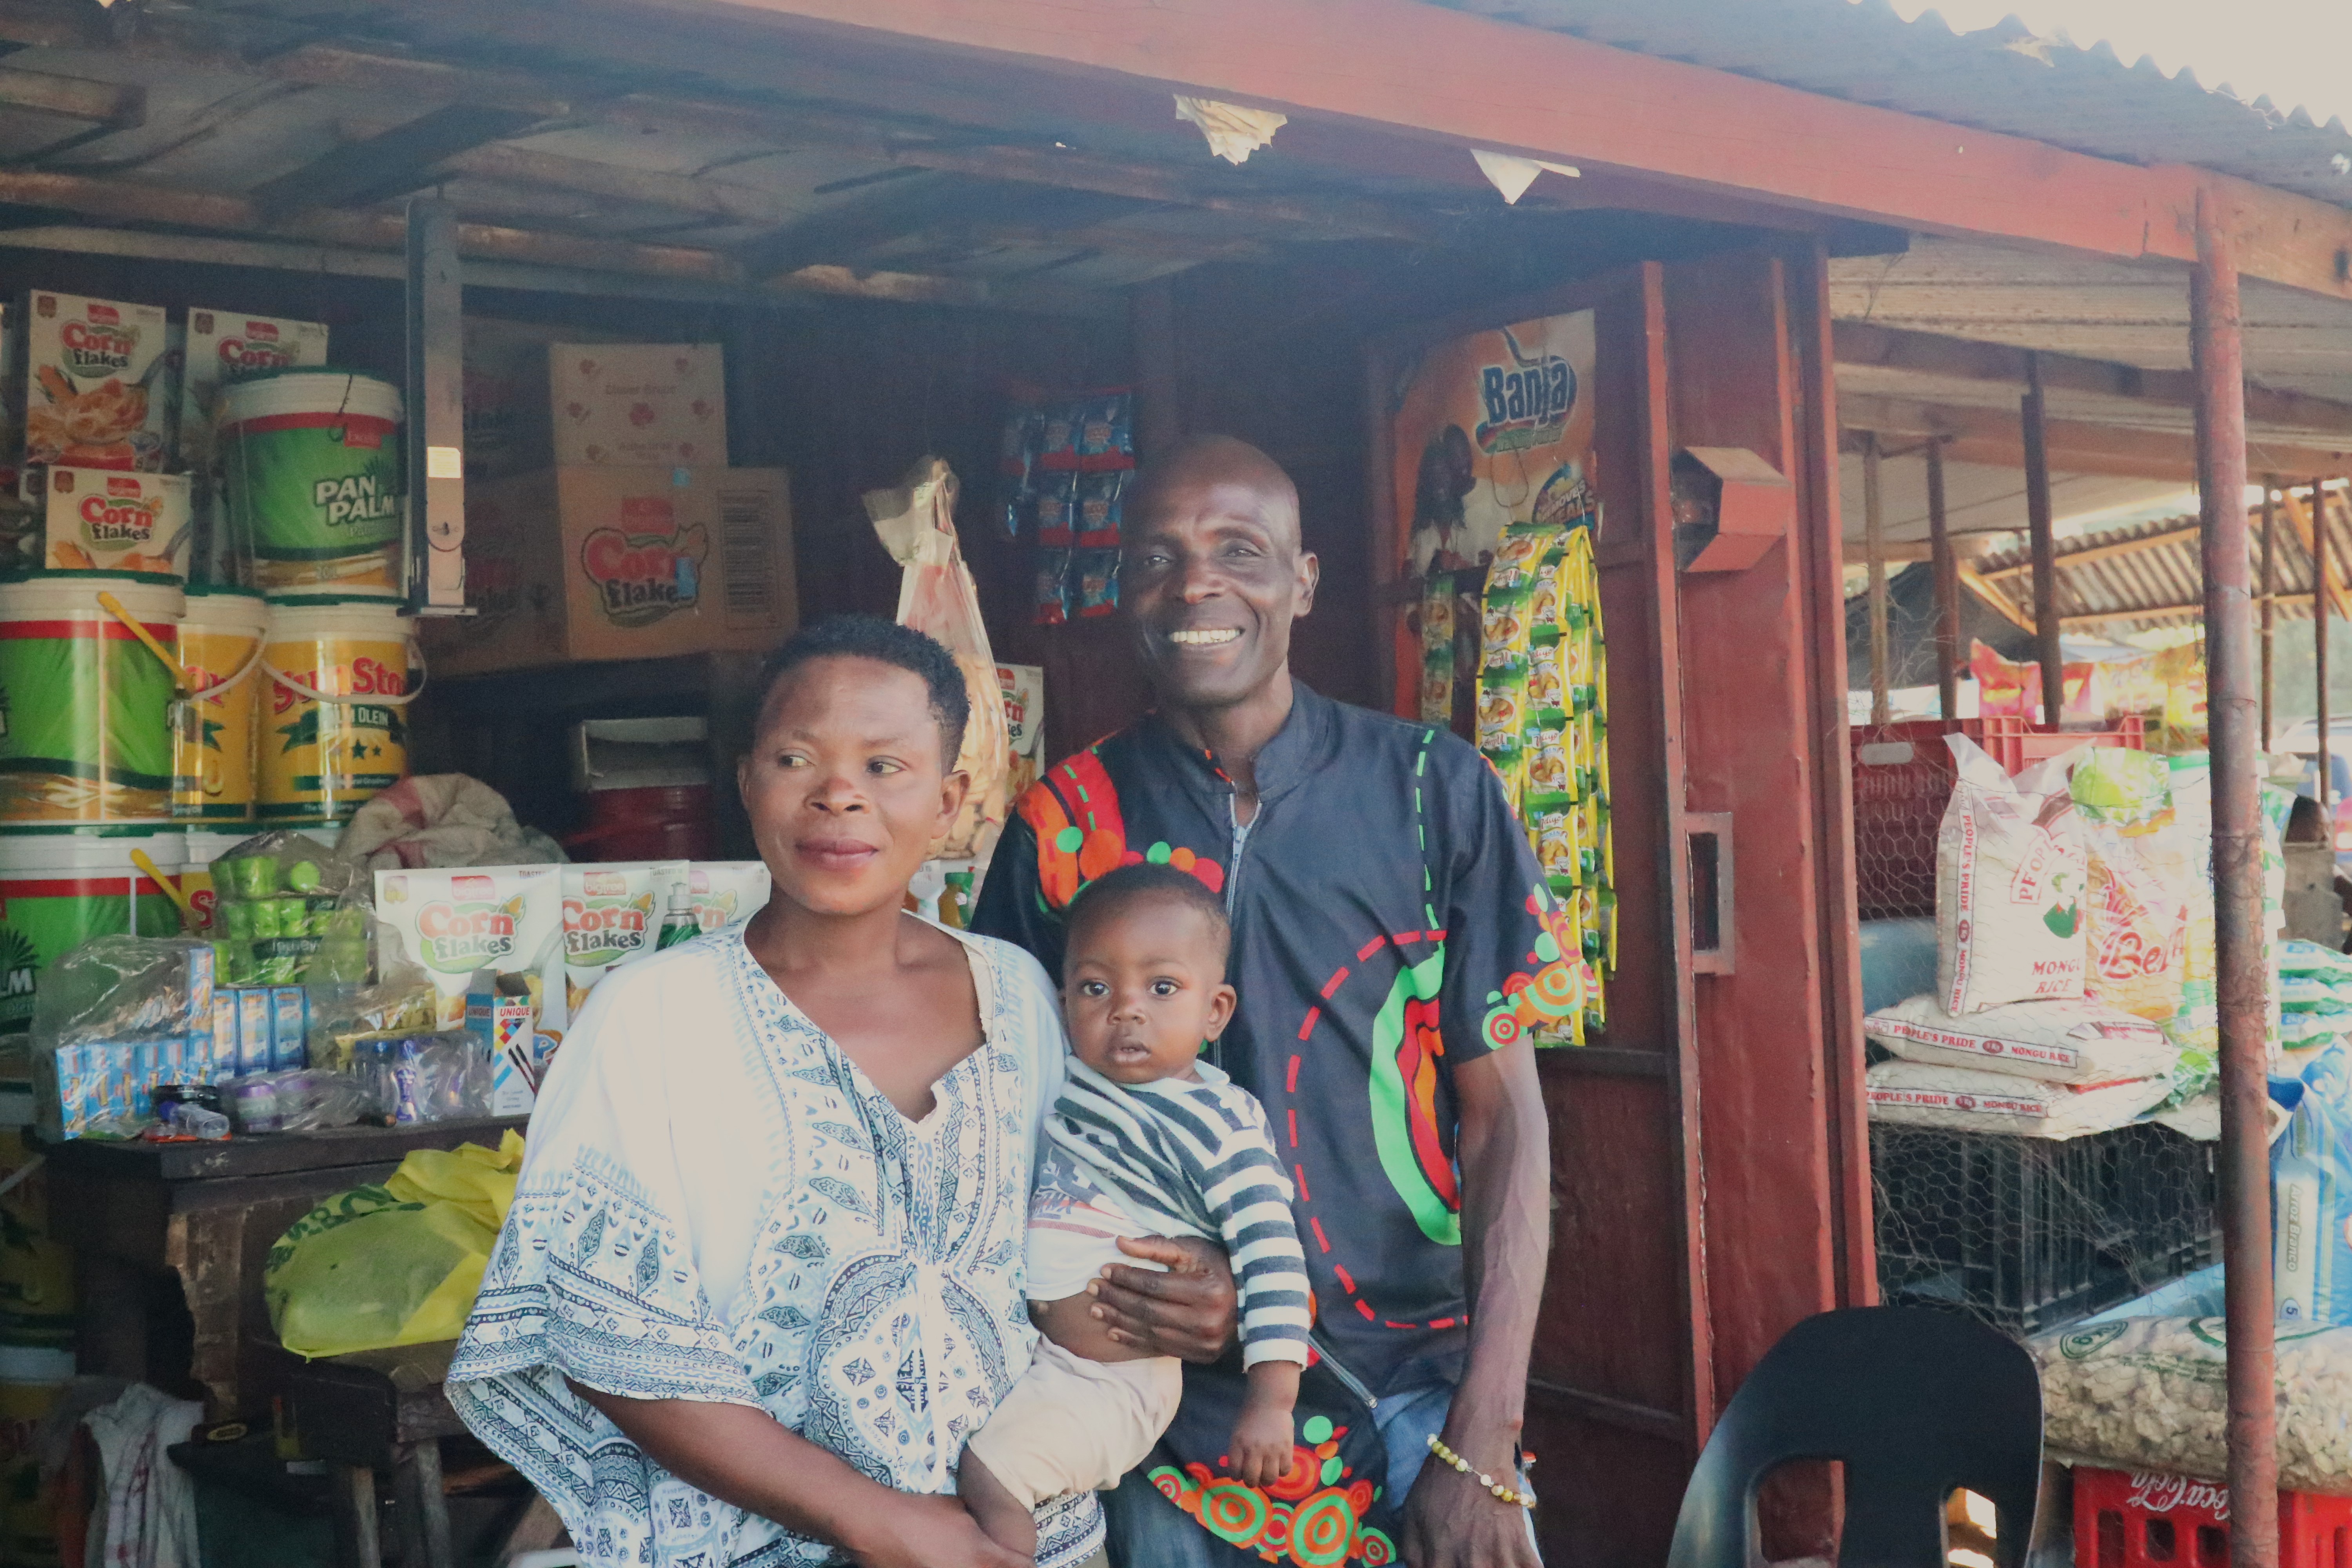 Emelda and Richard, beneficiaries of the Rovolving Fund, in front of their stall in Dambwa Street Market